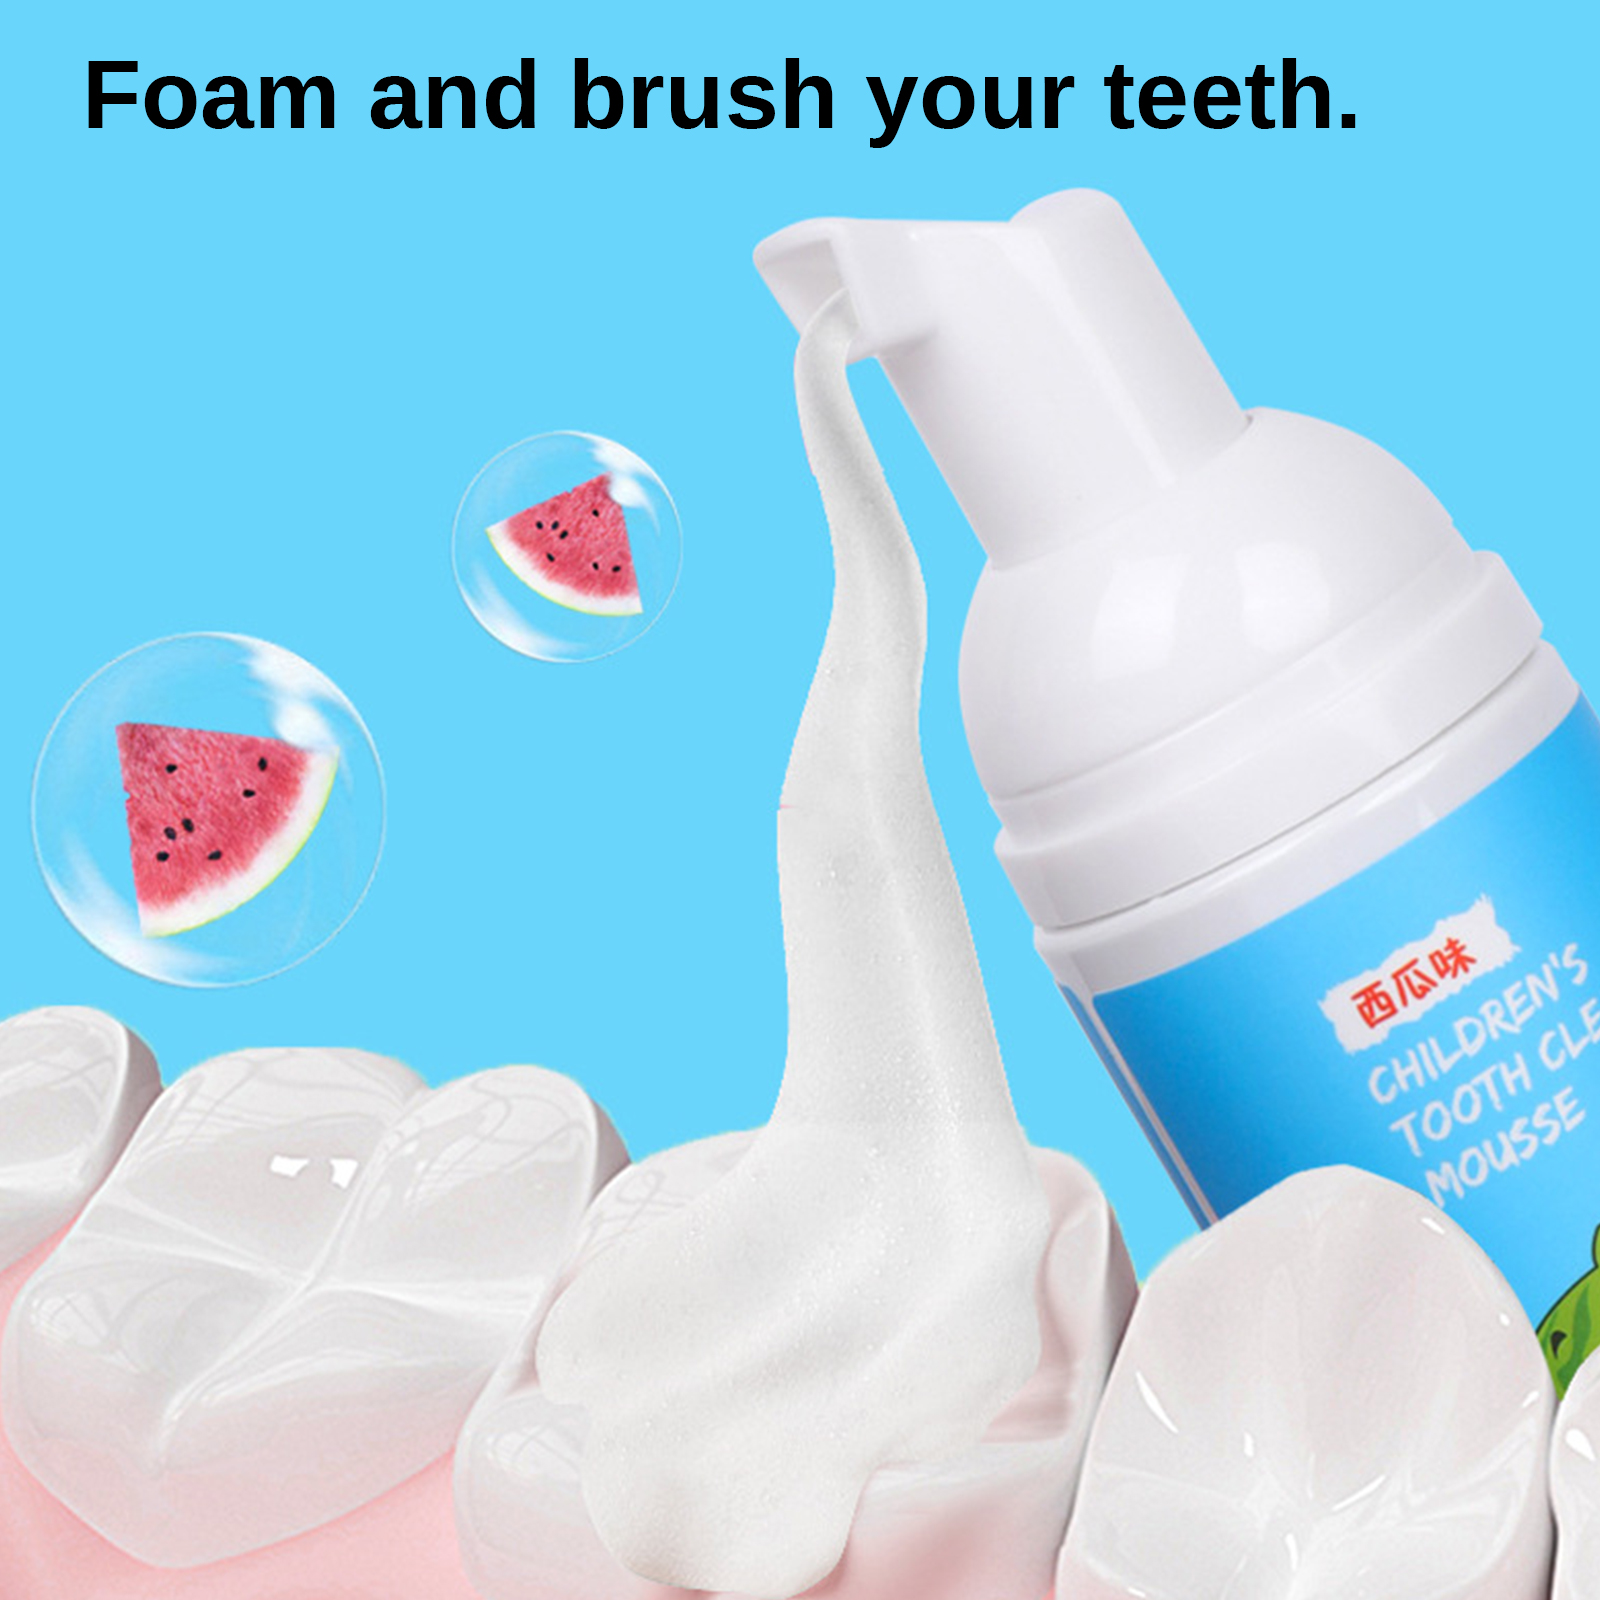 (🎄CHRISTMAS EARLY SALE-49% OFF)Children Teeth Mousse🔥Buy More,Save More🔥